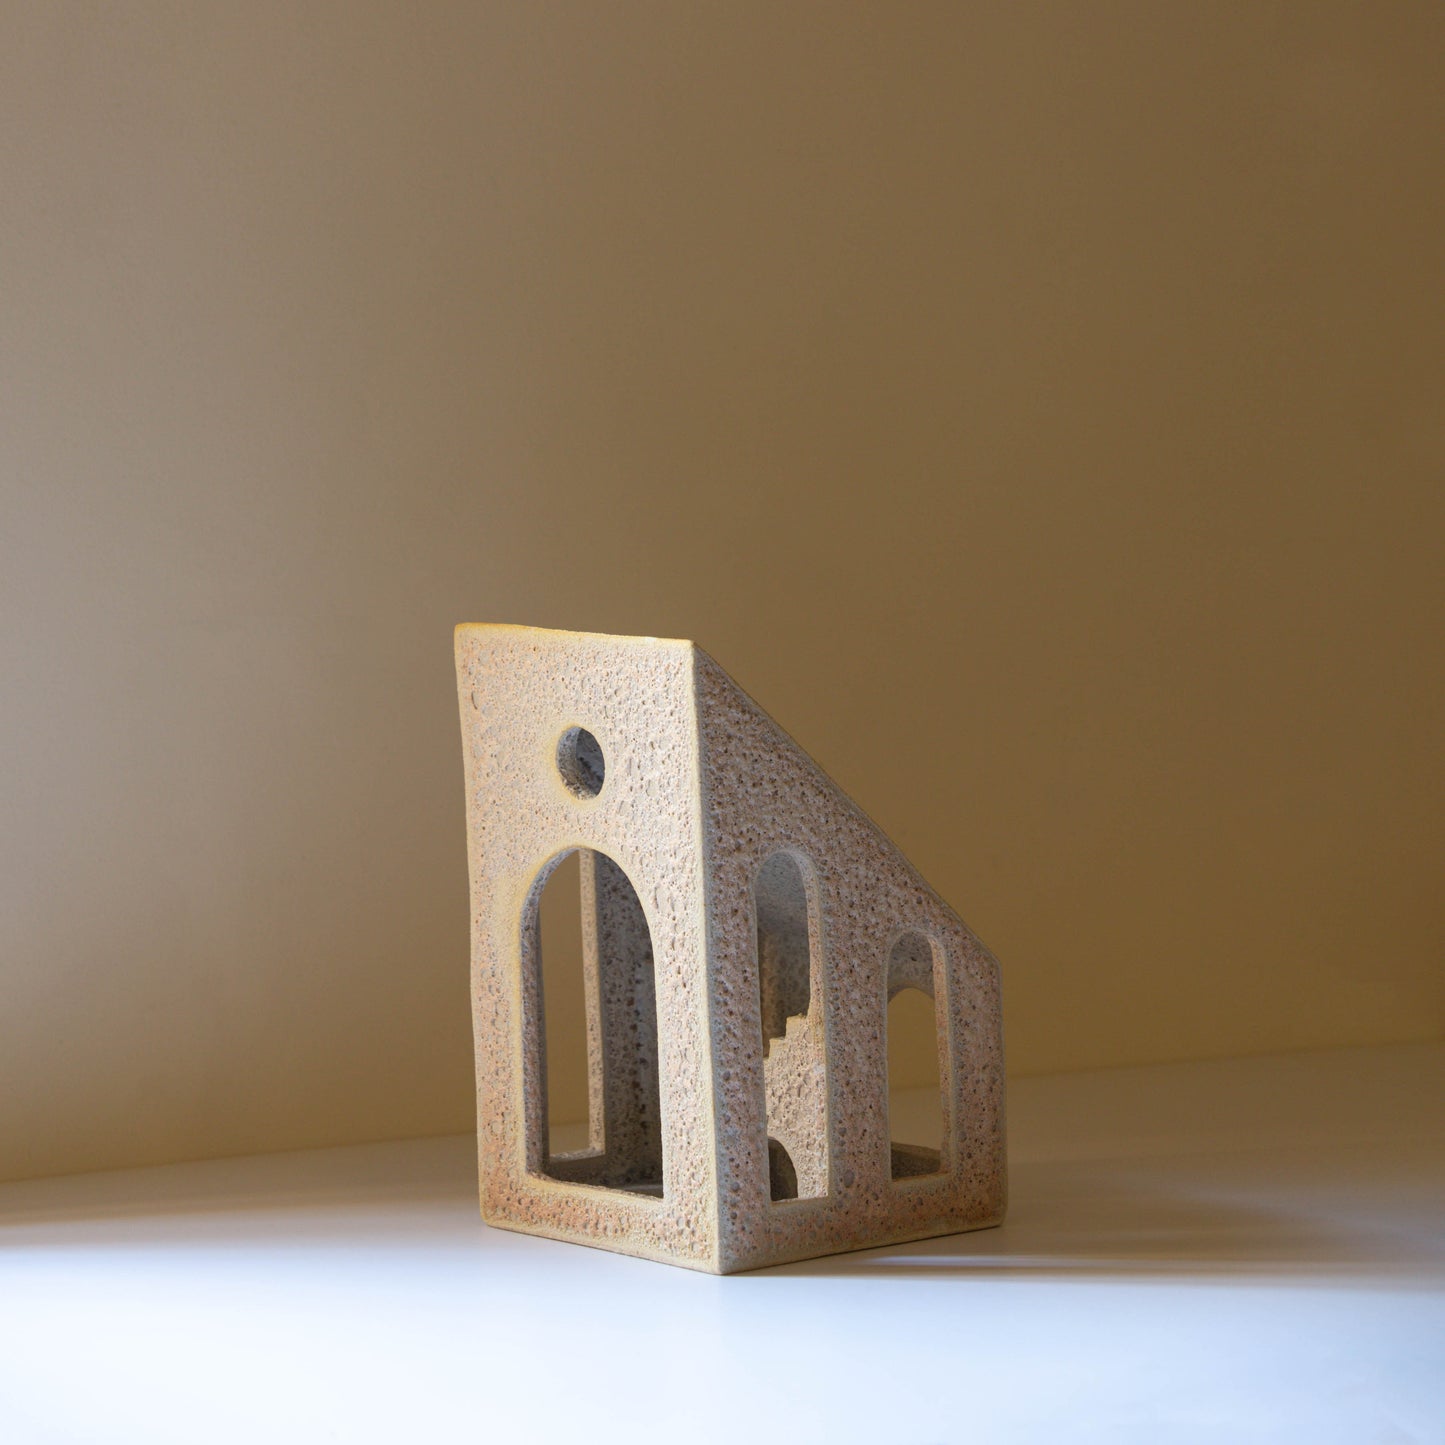 Handmade ceramic sculpture with textural glaze in a lavender, silver, and blush colour. The piece features cut out windows and archways as well as an internal staircase. 